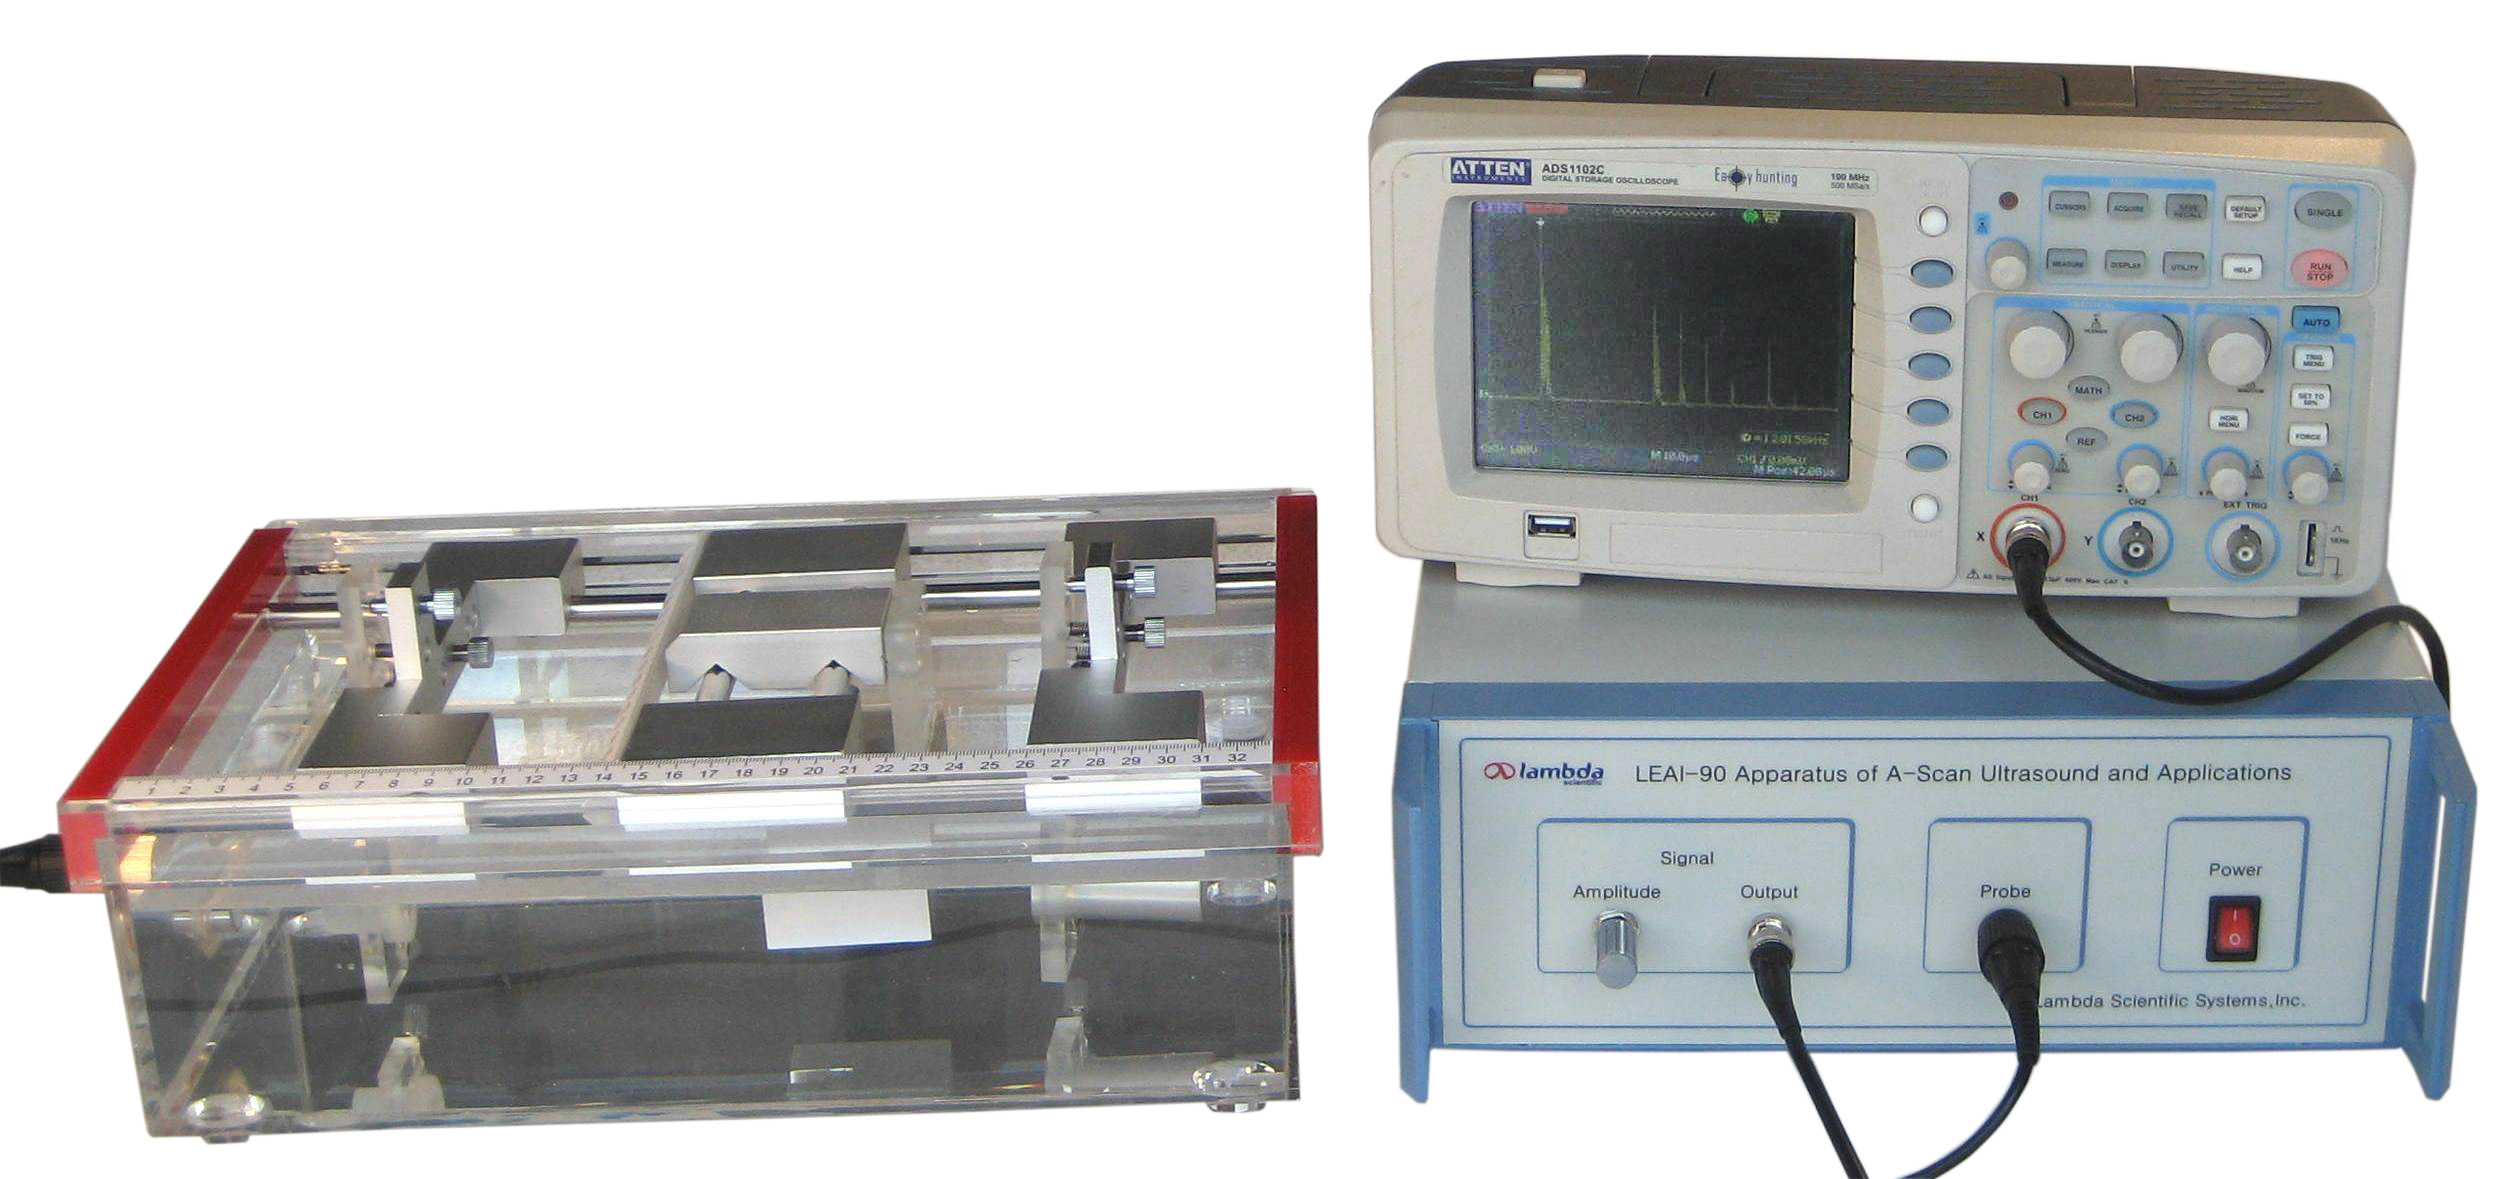 LEAI-90 Apparatus of A-Scan Ultrasound & Applications